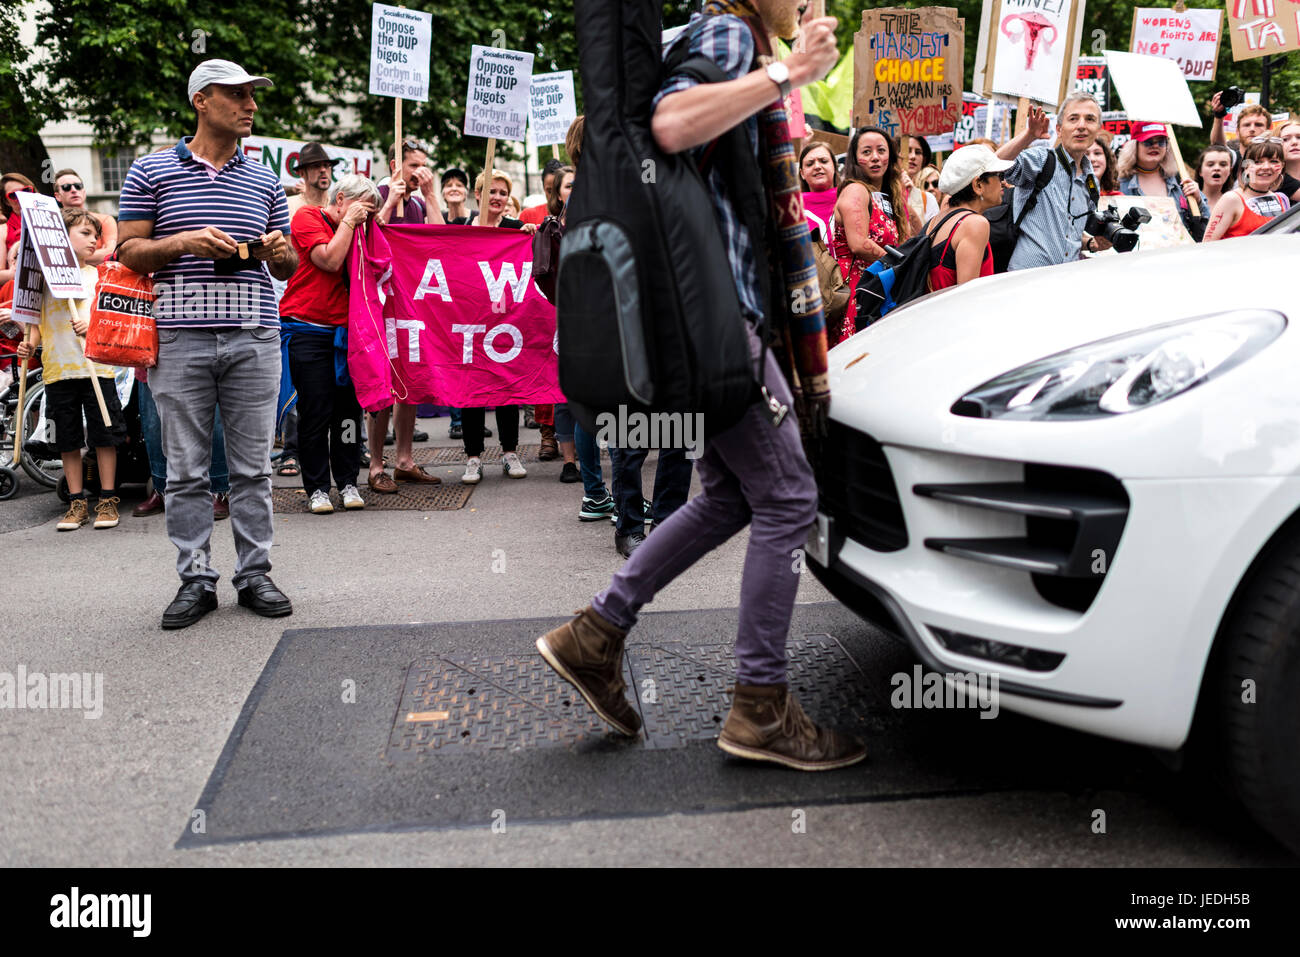 London, UK, 24th June 2017. Young people protest in front of Downing Street against the Tory government which is trying to create an alliance with the DUP. Credit: onebluelight.com/Alamy Live News Stock Photo